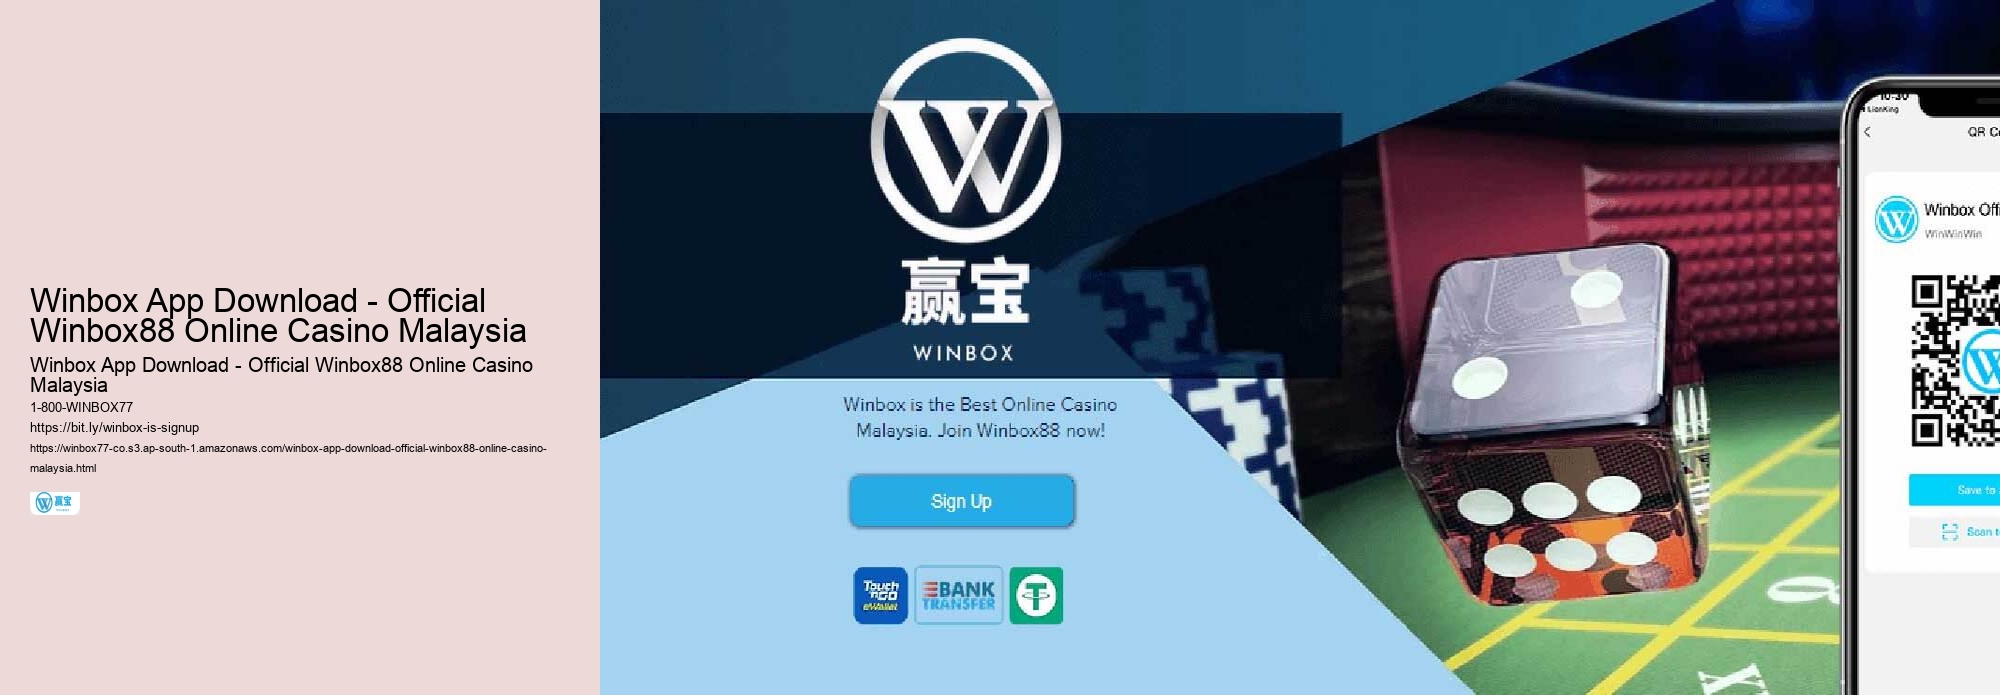 Winbox App Download - Official Winbox88 Online Casino Malaysia